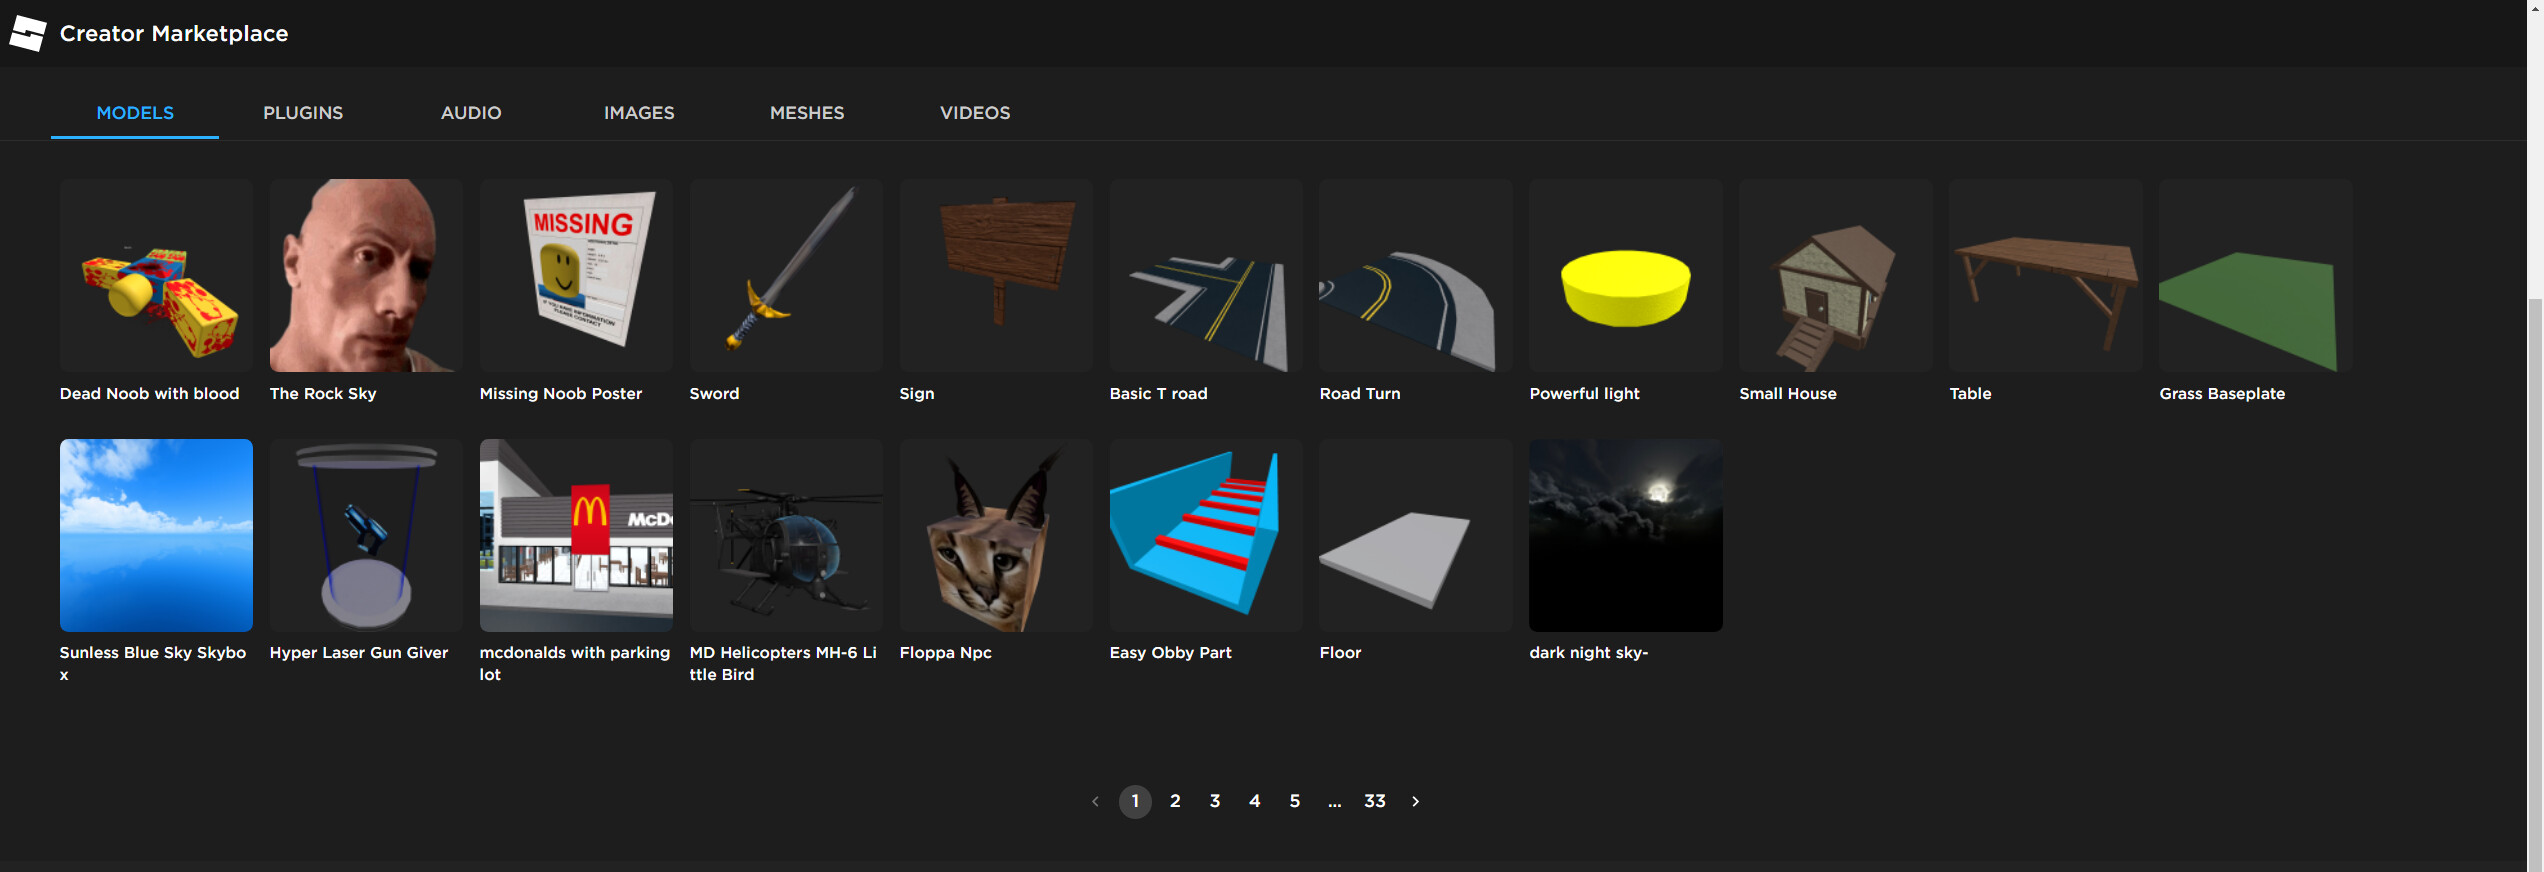 Roblox Creator Marketplace - Opinions? - General - Cookie Tech